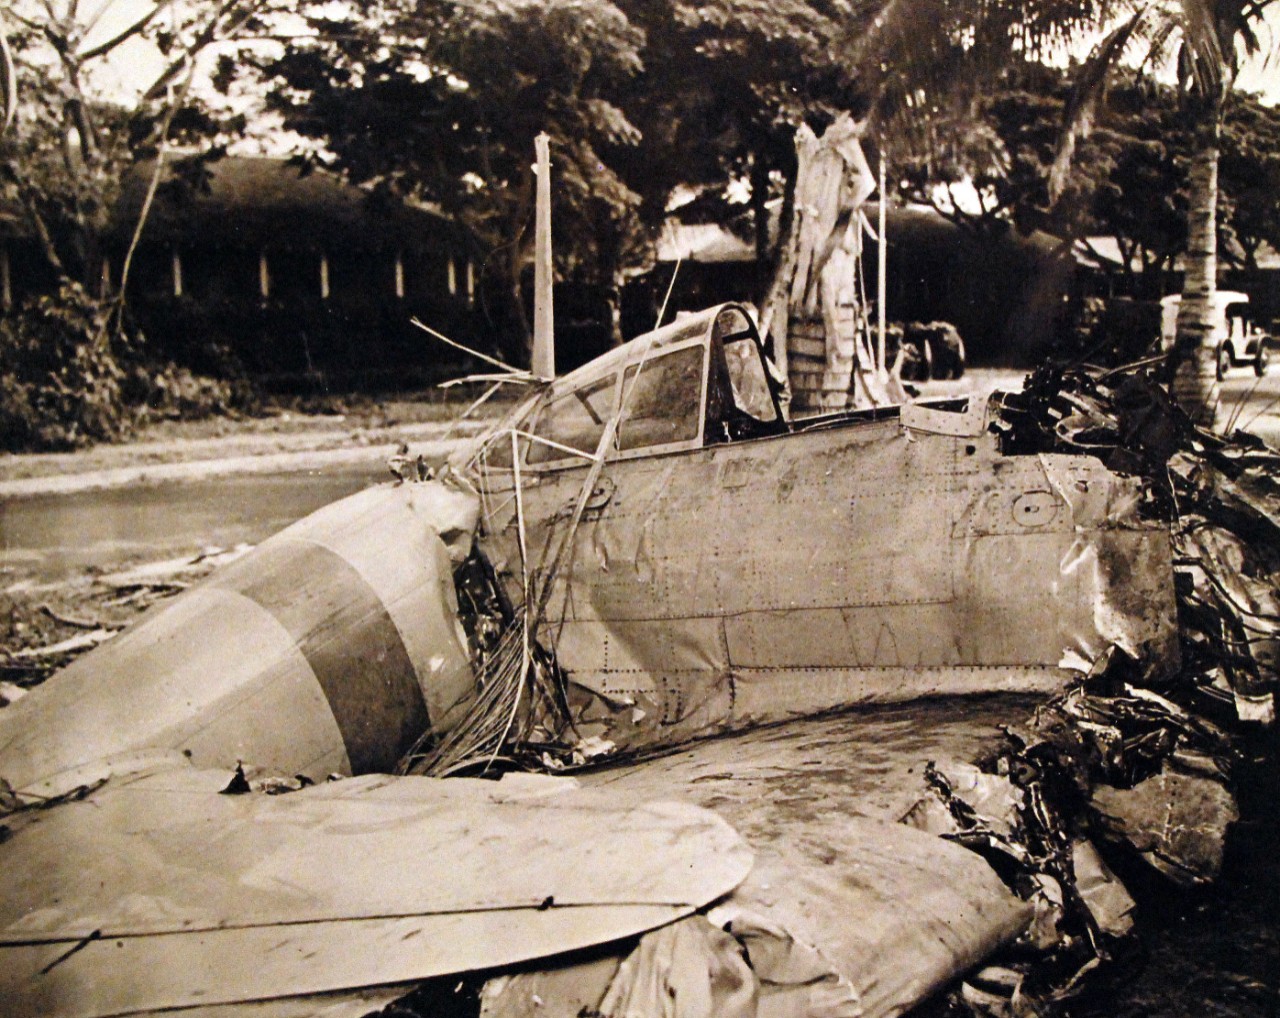 80-G-13040:  Japanese Attack, Pearl Harbor, December 7, 1941.   Mitsubishi A6M2 “Zero” from Japanese aircraft carrier Akagi shot down during the attack.  Official U.S. Navy Photograph, now in the collections of the National Archives. (9/29/2015).